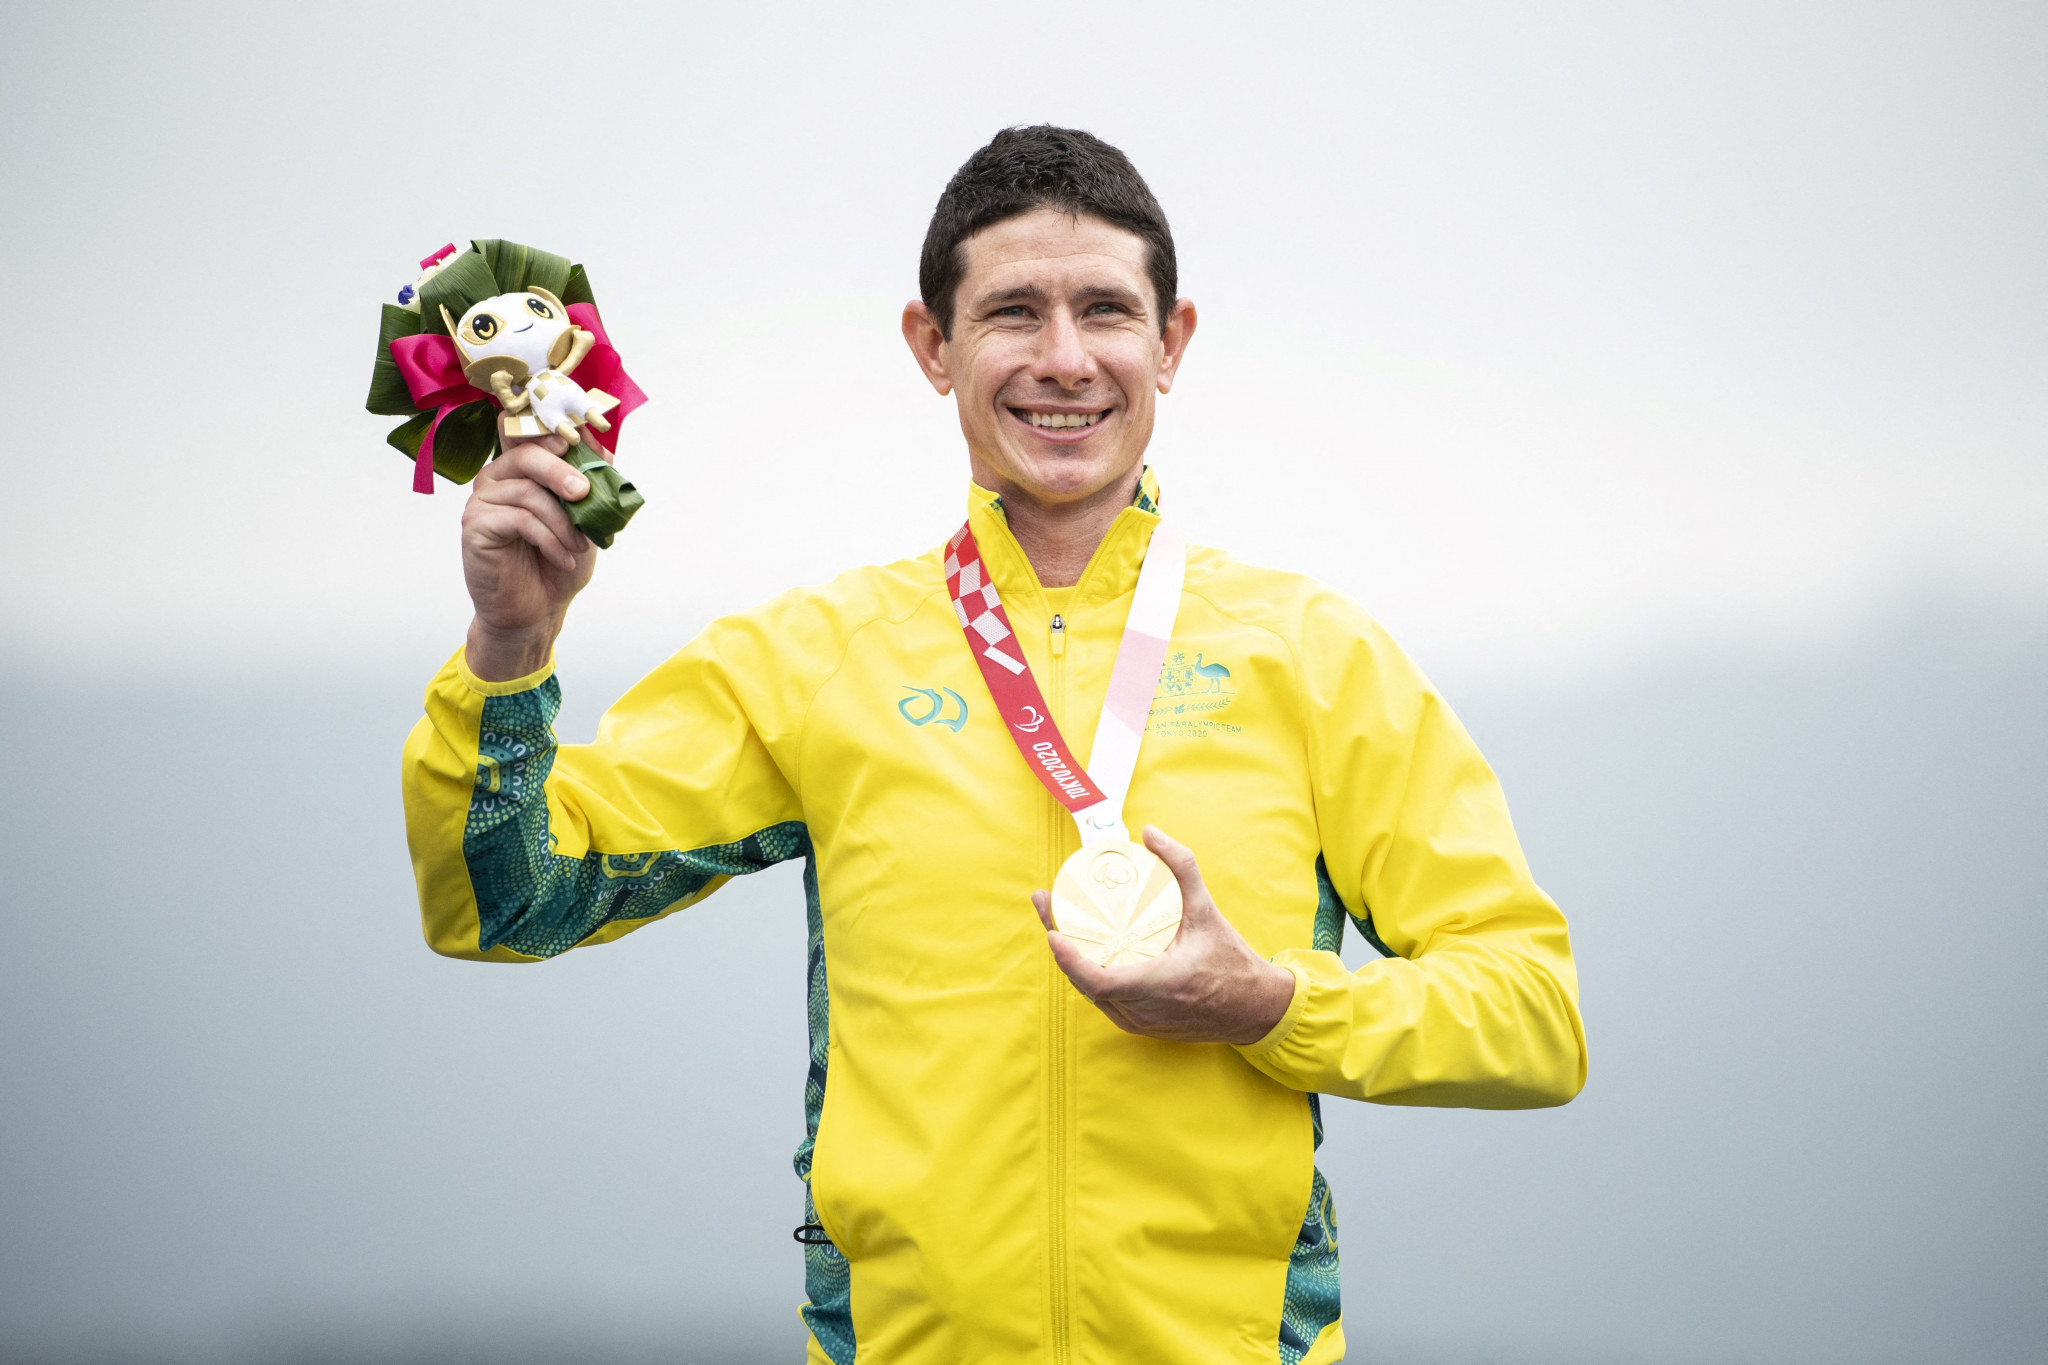 Australia's Paralympic cycling gold-medallist Darren Hicks insisted he was not offended by the video ©Getty Images